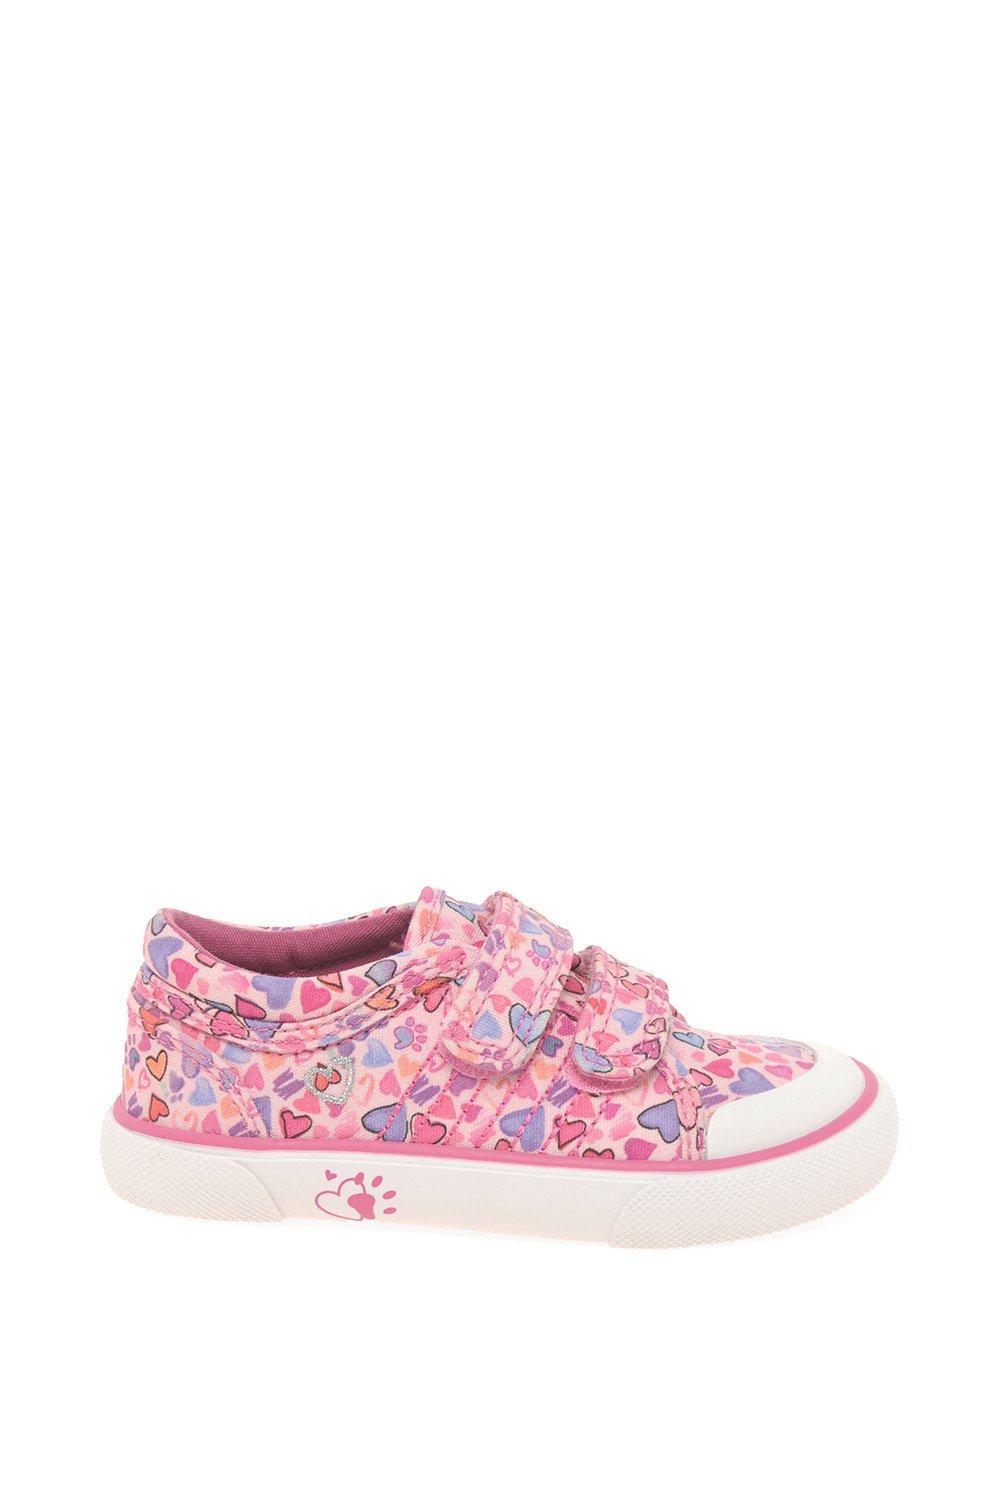 Loveheart Girls Infant Canvas Shoes